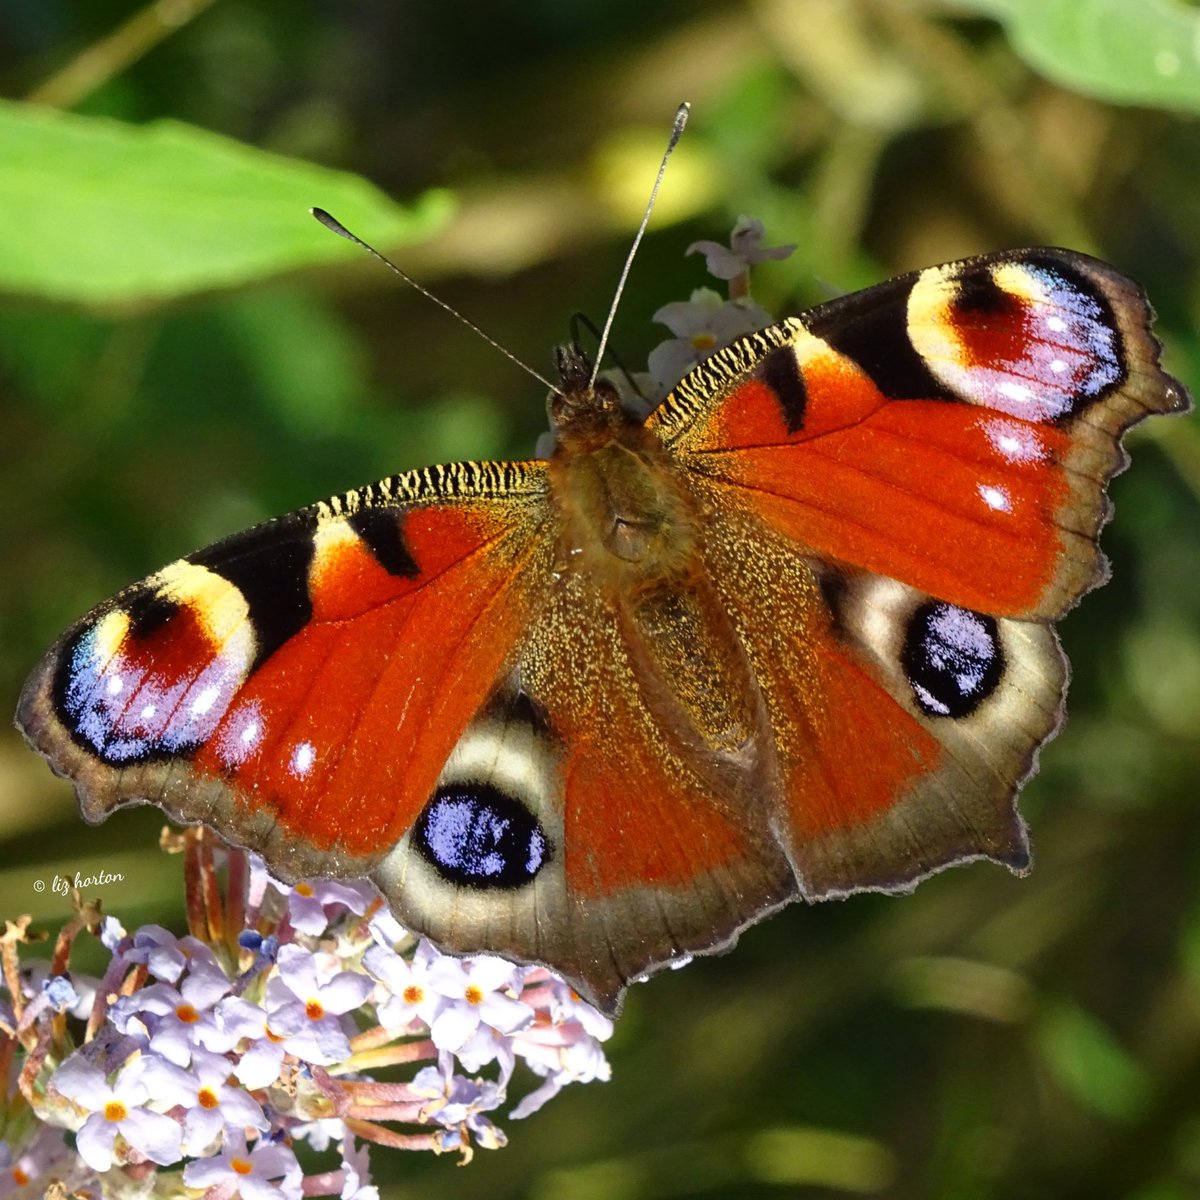 The best and most beautiful things in the world cannot be seen or even touched. They must be felt with the heart. Helen Keller #quote
Peacock #butterfly #nature #wildlife #photography
#NaturePhotography #WildlifePhotography https://t.co/8xa0MlgDl6